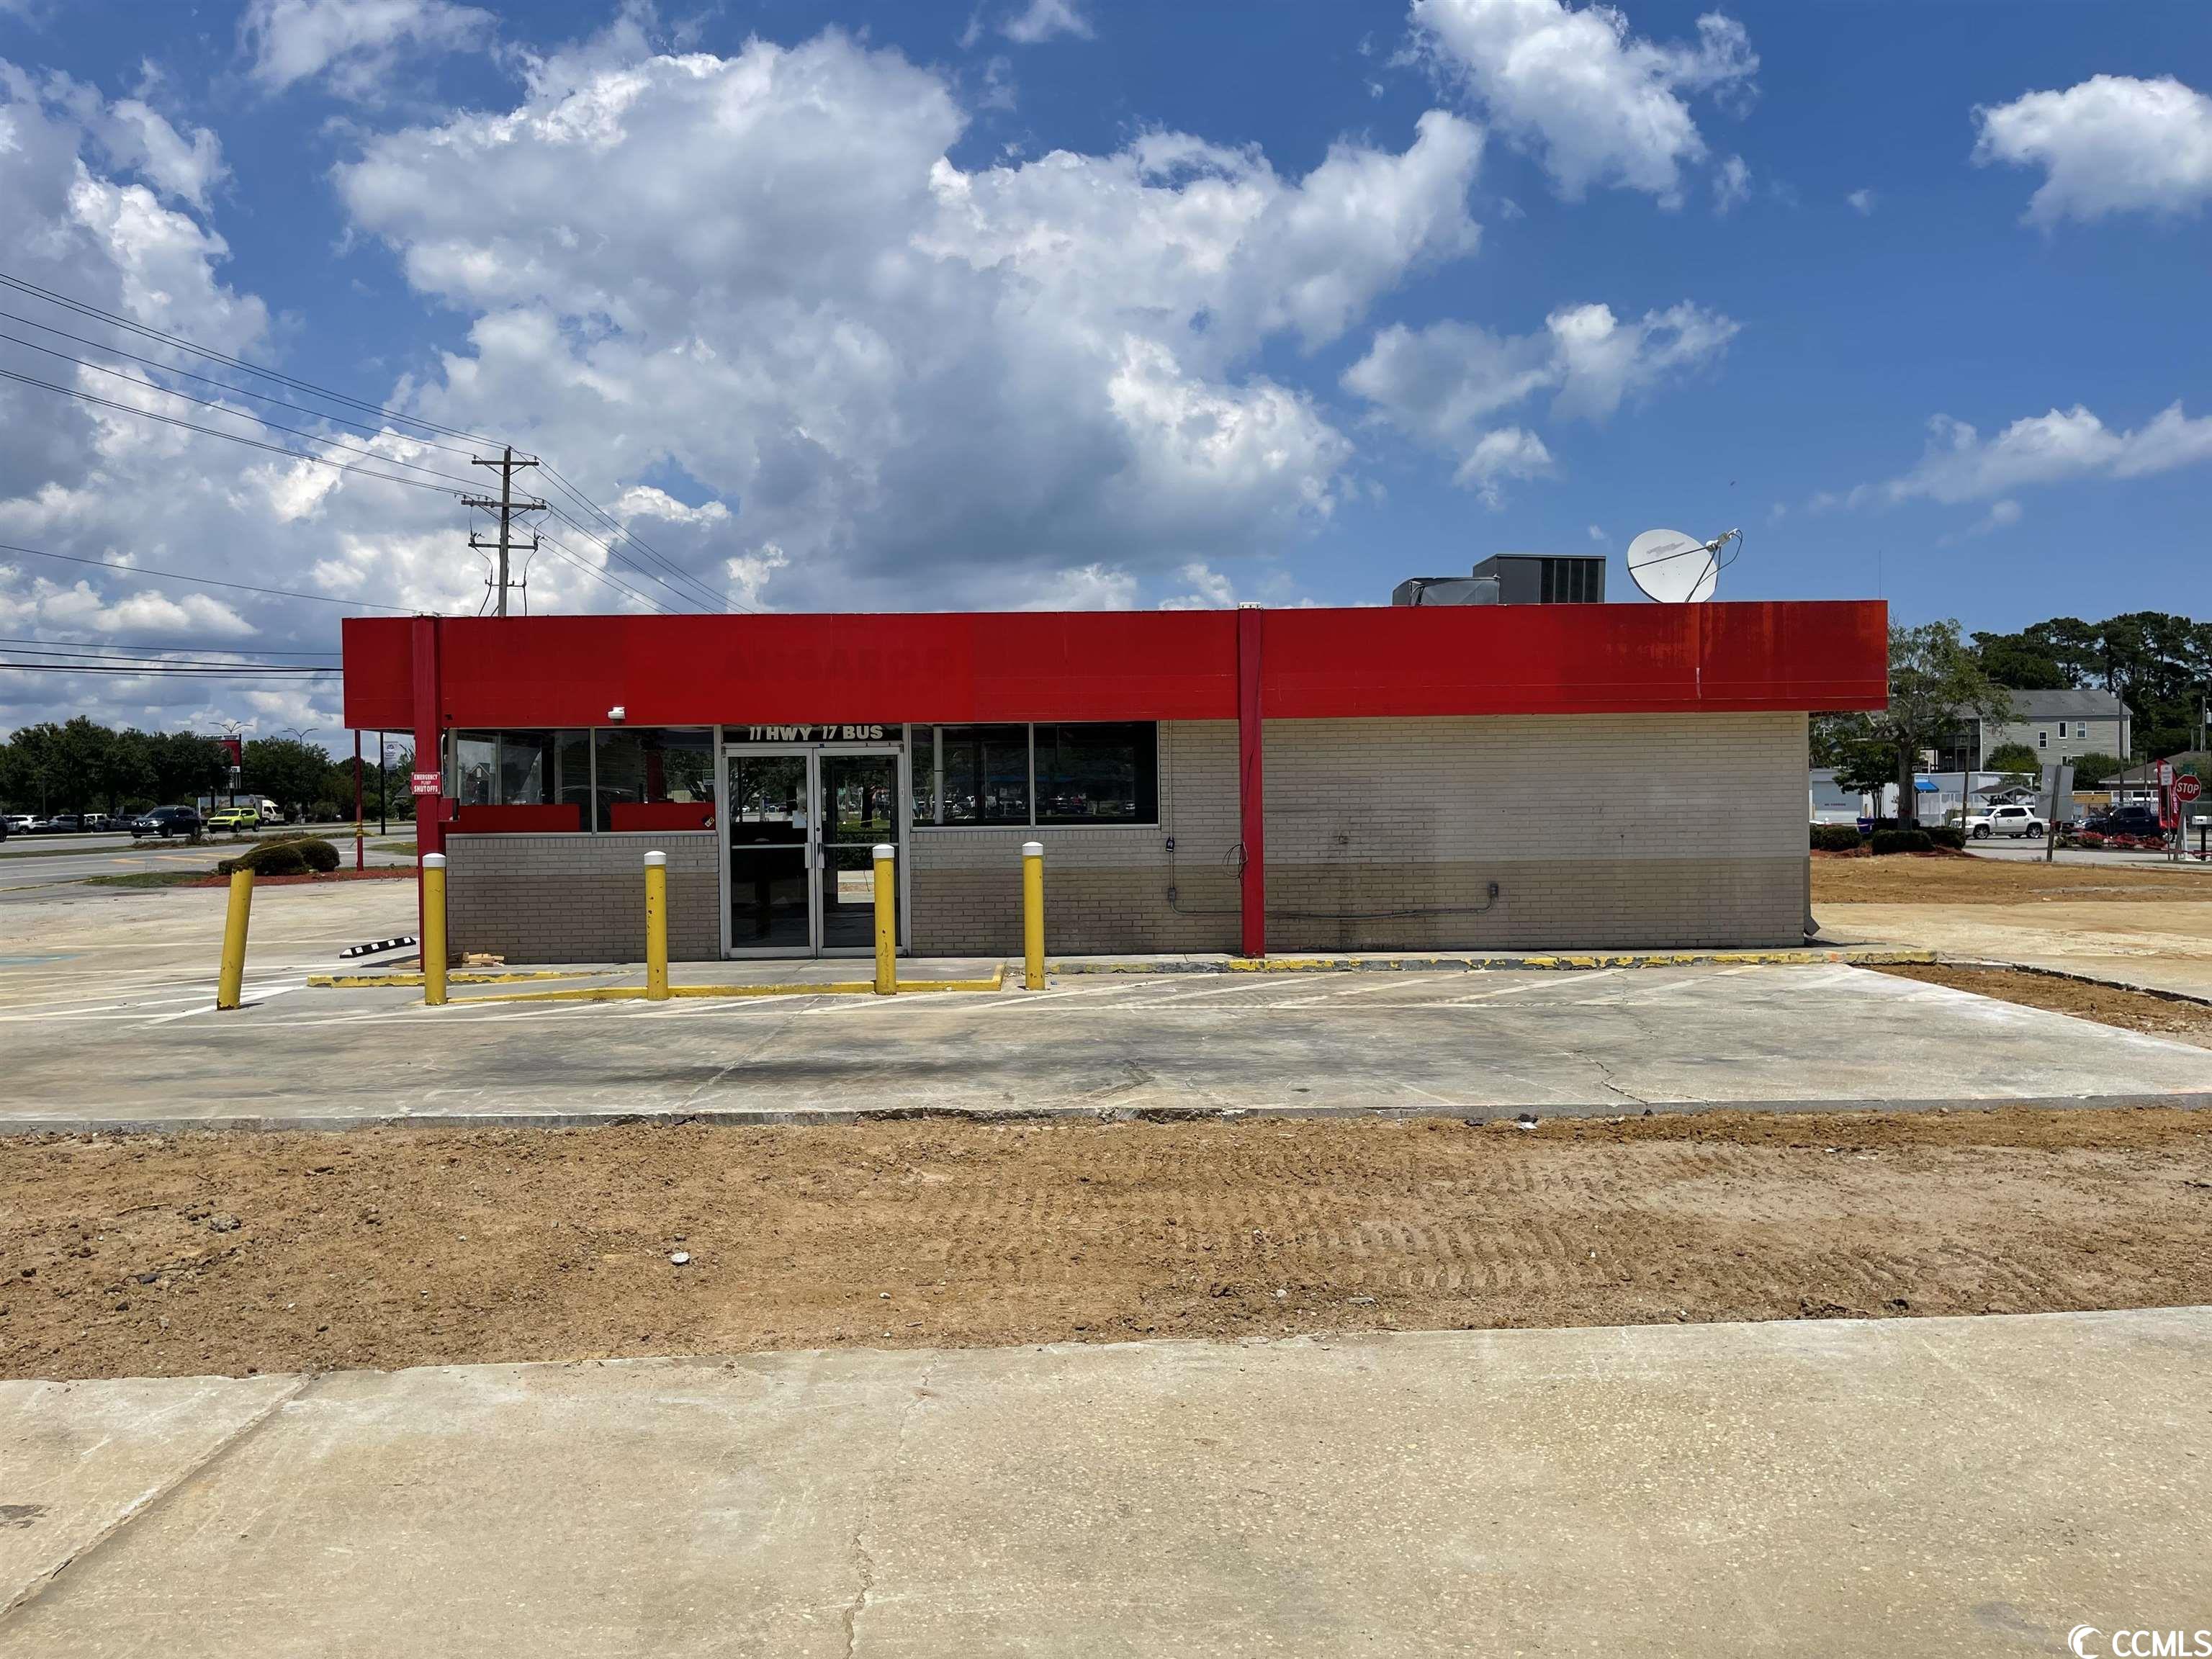 incredible corner location in the heart of surfside beach. c-2 zoning offers many potential commercial uses. excellent egress and ingress and visibility. long term gound lease opportunity. the site is .74 of an acre and has an 1,075 square foot building. call listing agent. rental agreement lease terms - 20 years with options to renew